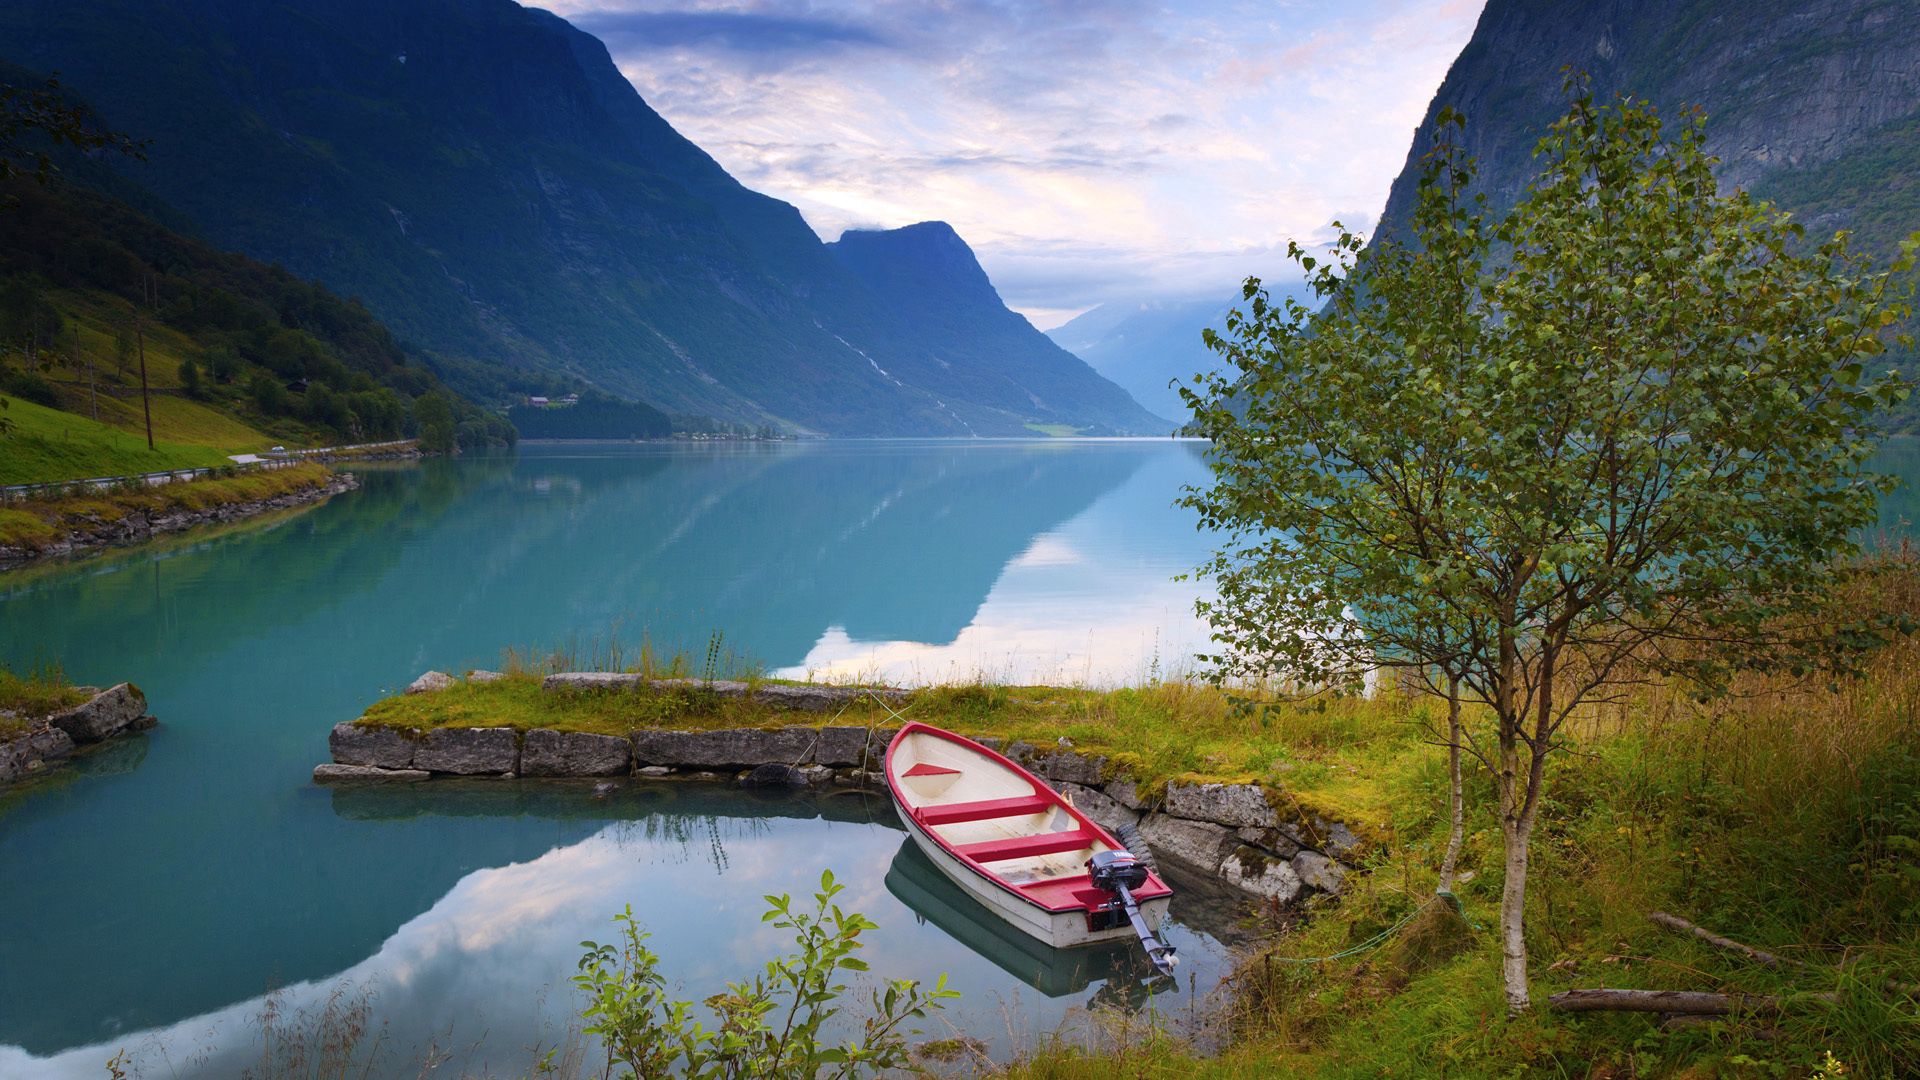 norway, lake, nature, grass, stones, mountains, shore, bank, boat, blue water wallpaper for mobile